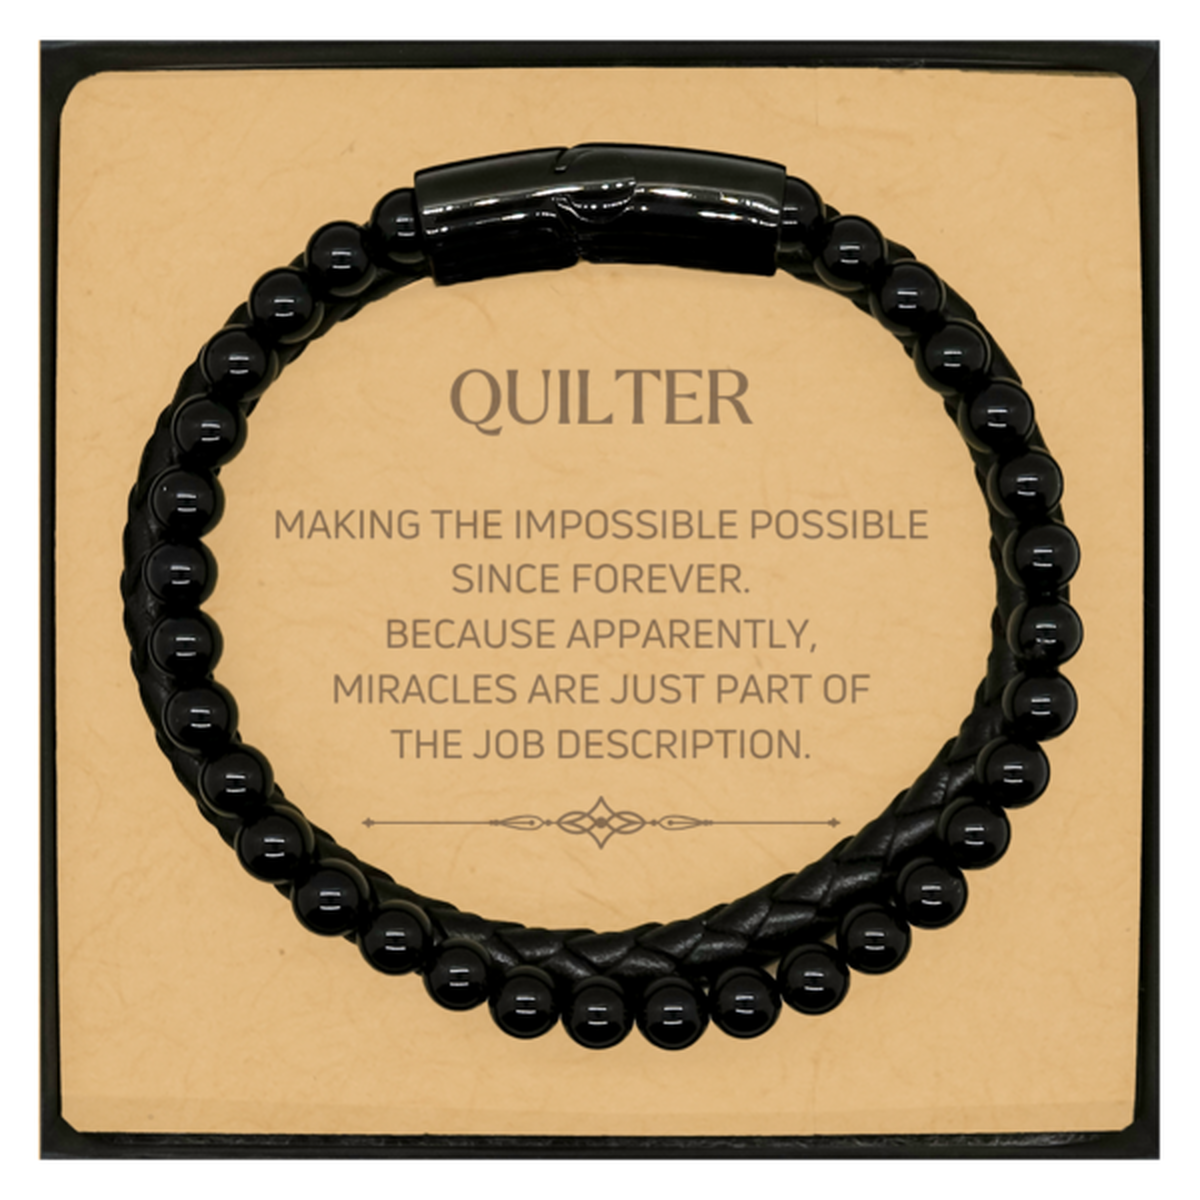 Funny Quilter Gifts, Miracles are just part of the job description, Inspirational Birthday Christmas Stone Leather Bracelets For Quilter, Men, Women, Coworkers, Friends, Boss